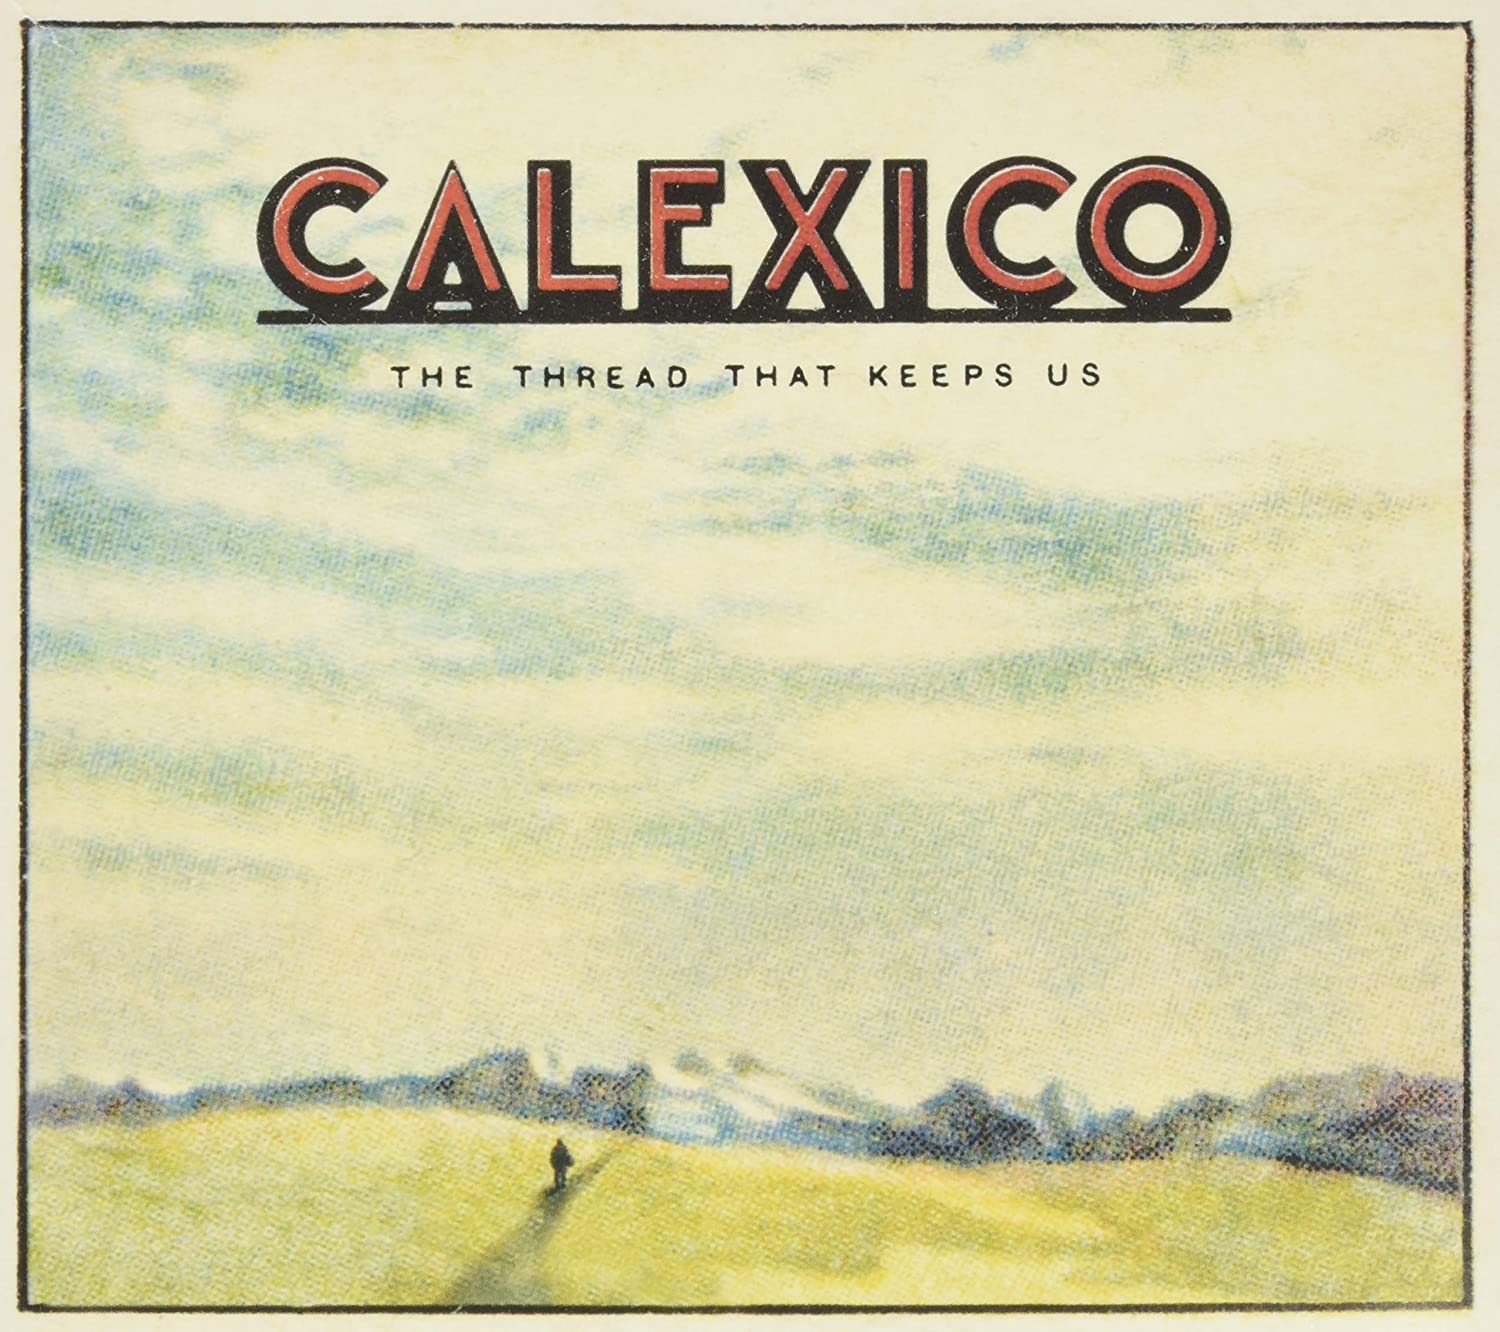 Calexico- The Thread That Keeps Us - Darkside Records